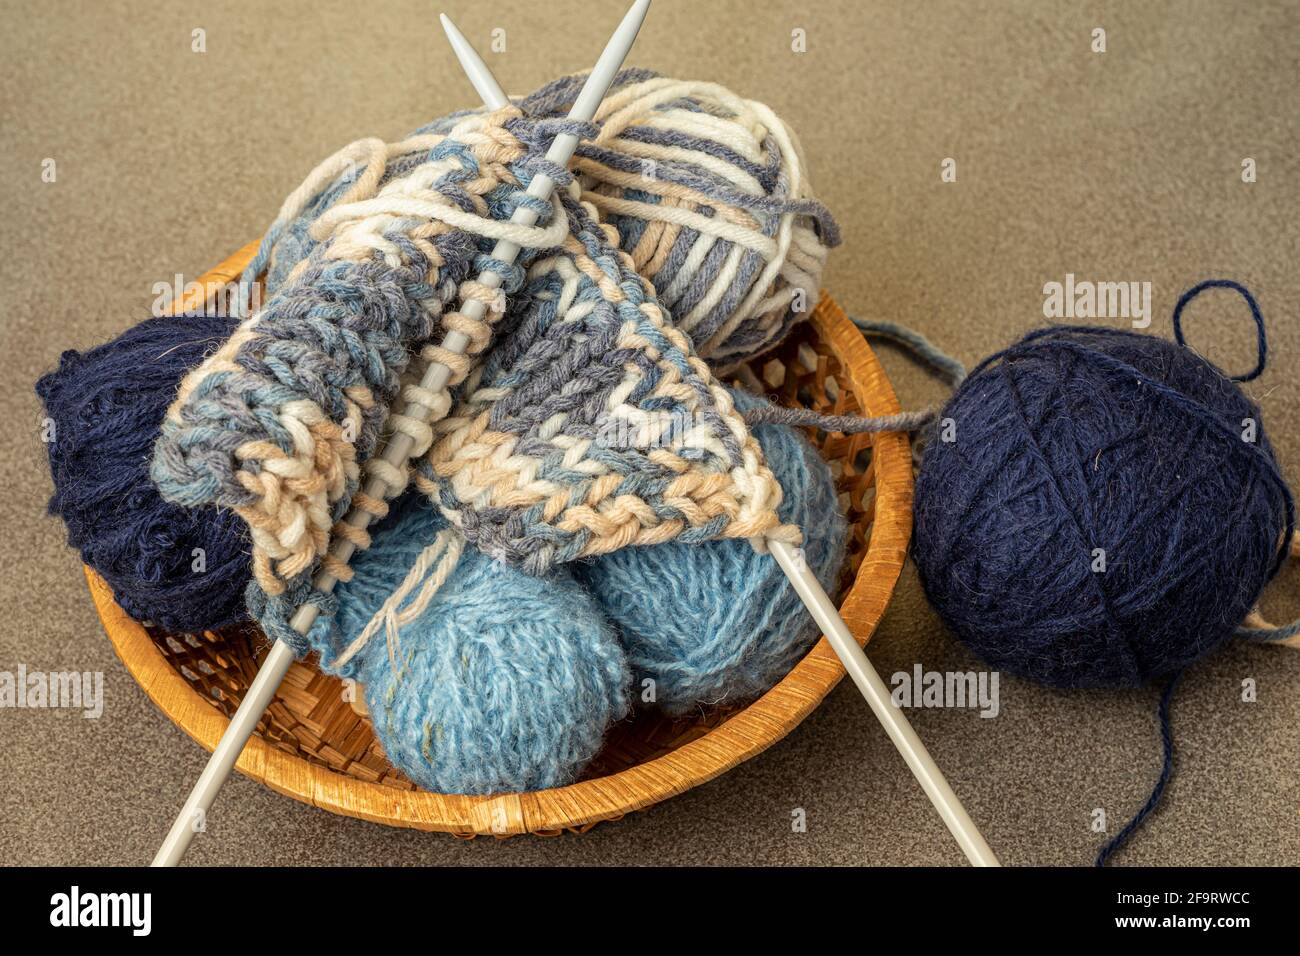 Knitting supplies close-up. Balls of knitting wool in a round wicker basket  Stock Photo - Alamy